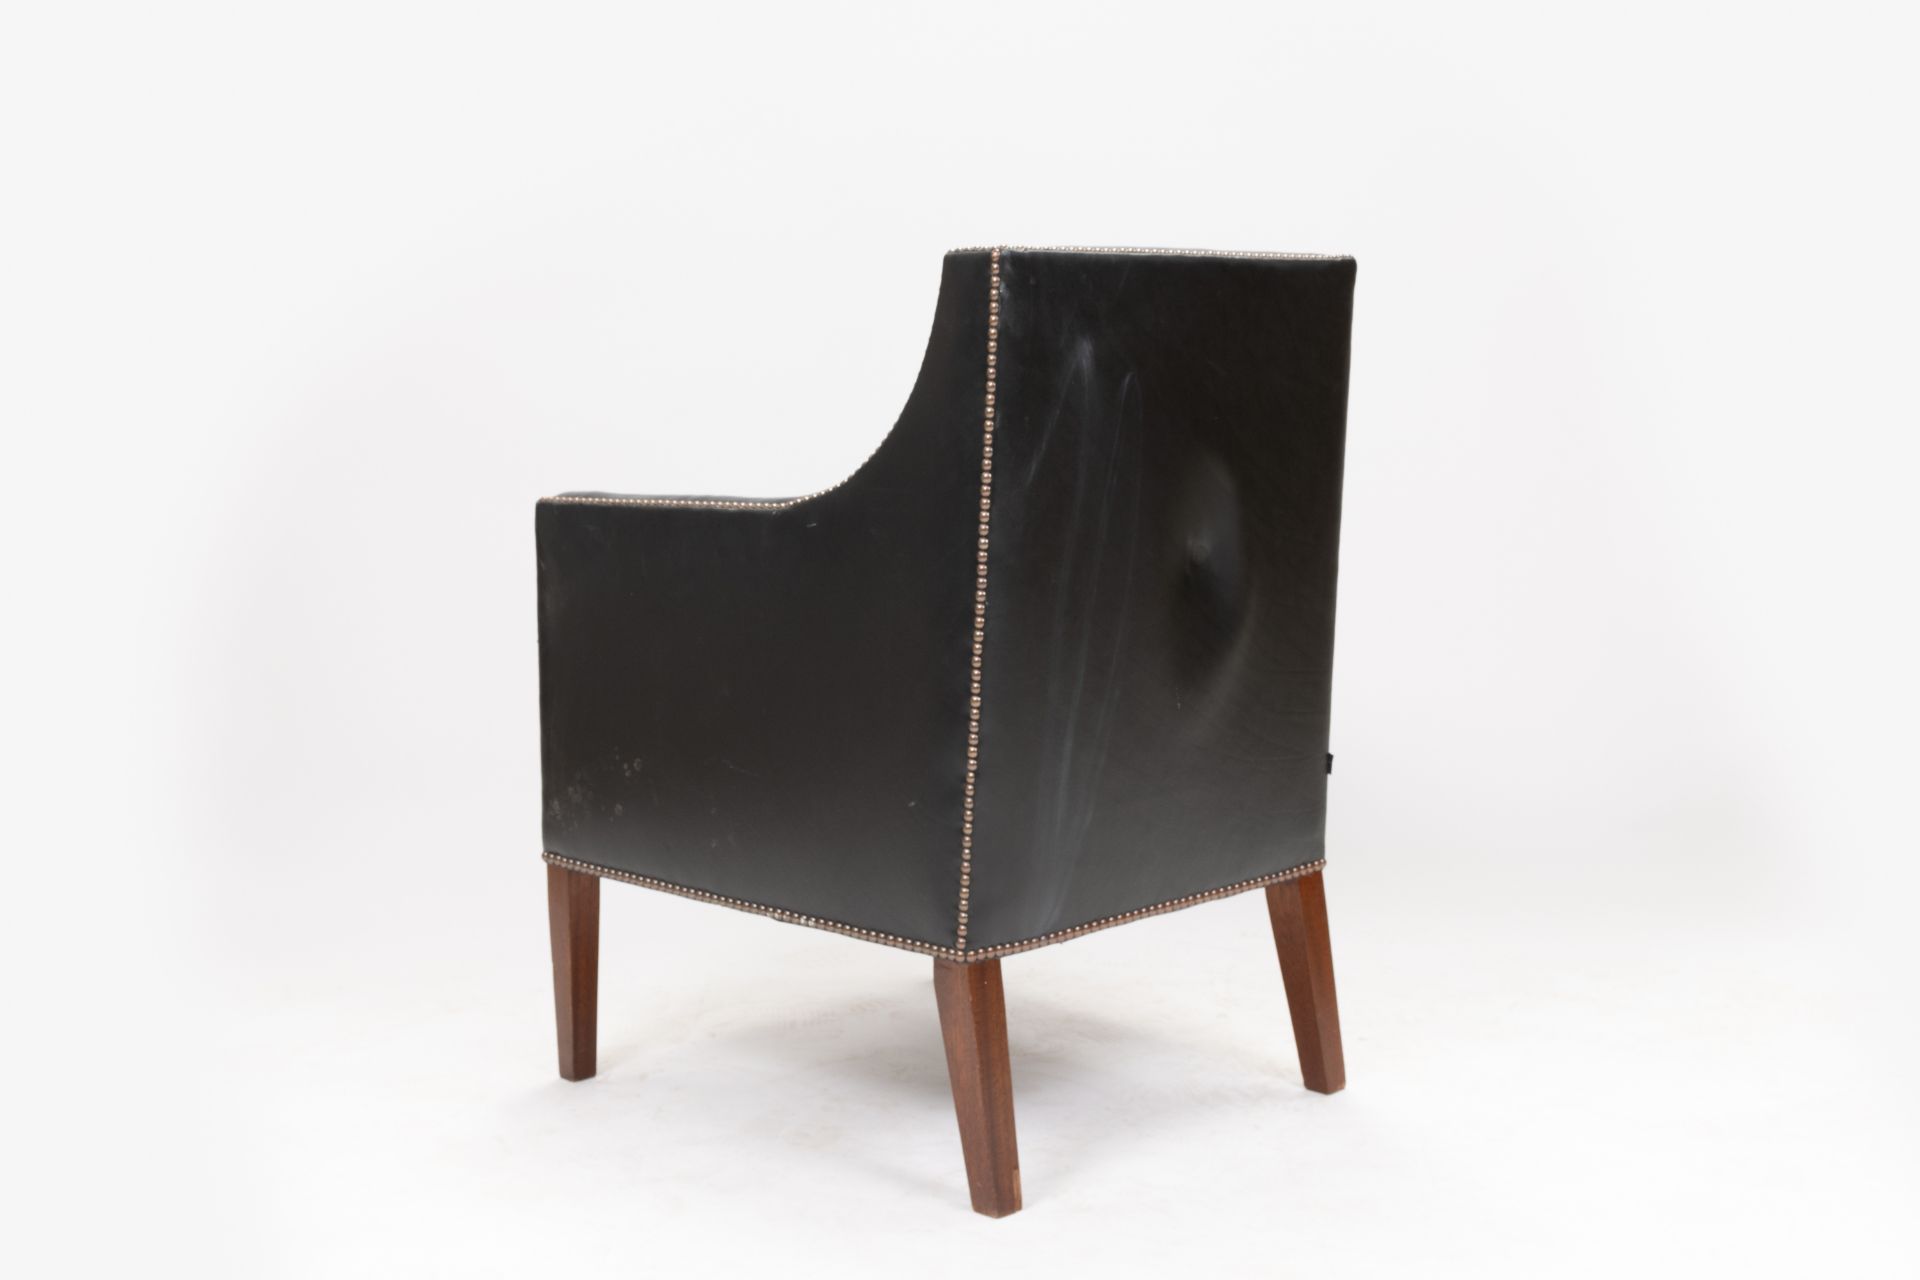 David Linley Lord Nelson Armchair - Image 6 of 7